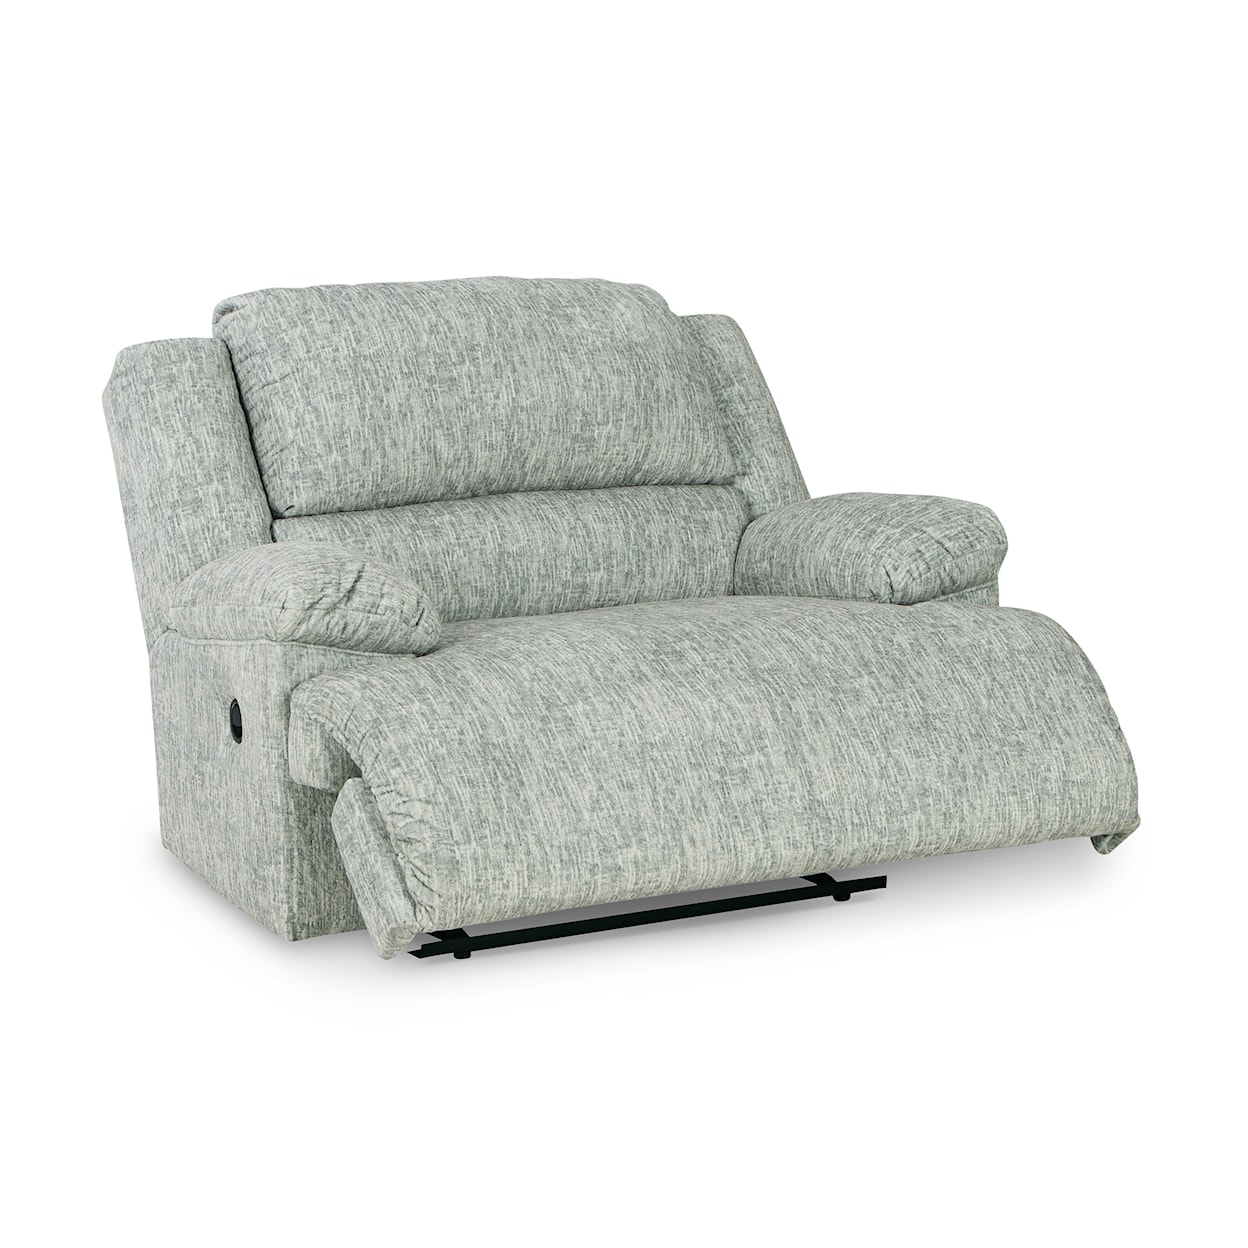 Signature Design by Ashley Furniture McClelland Oversized Recliner